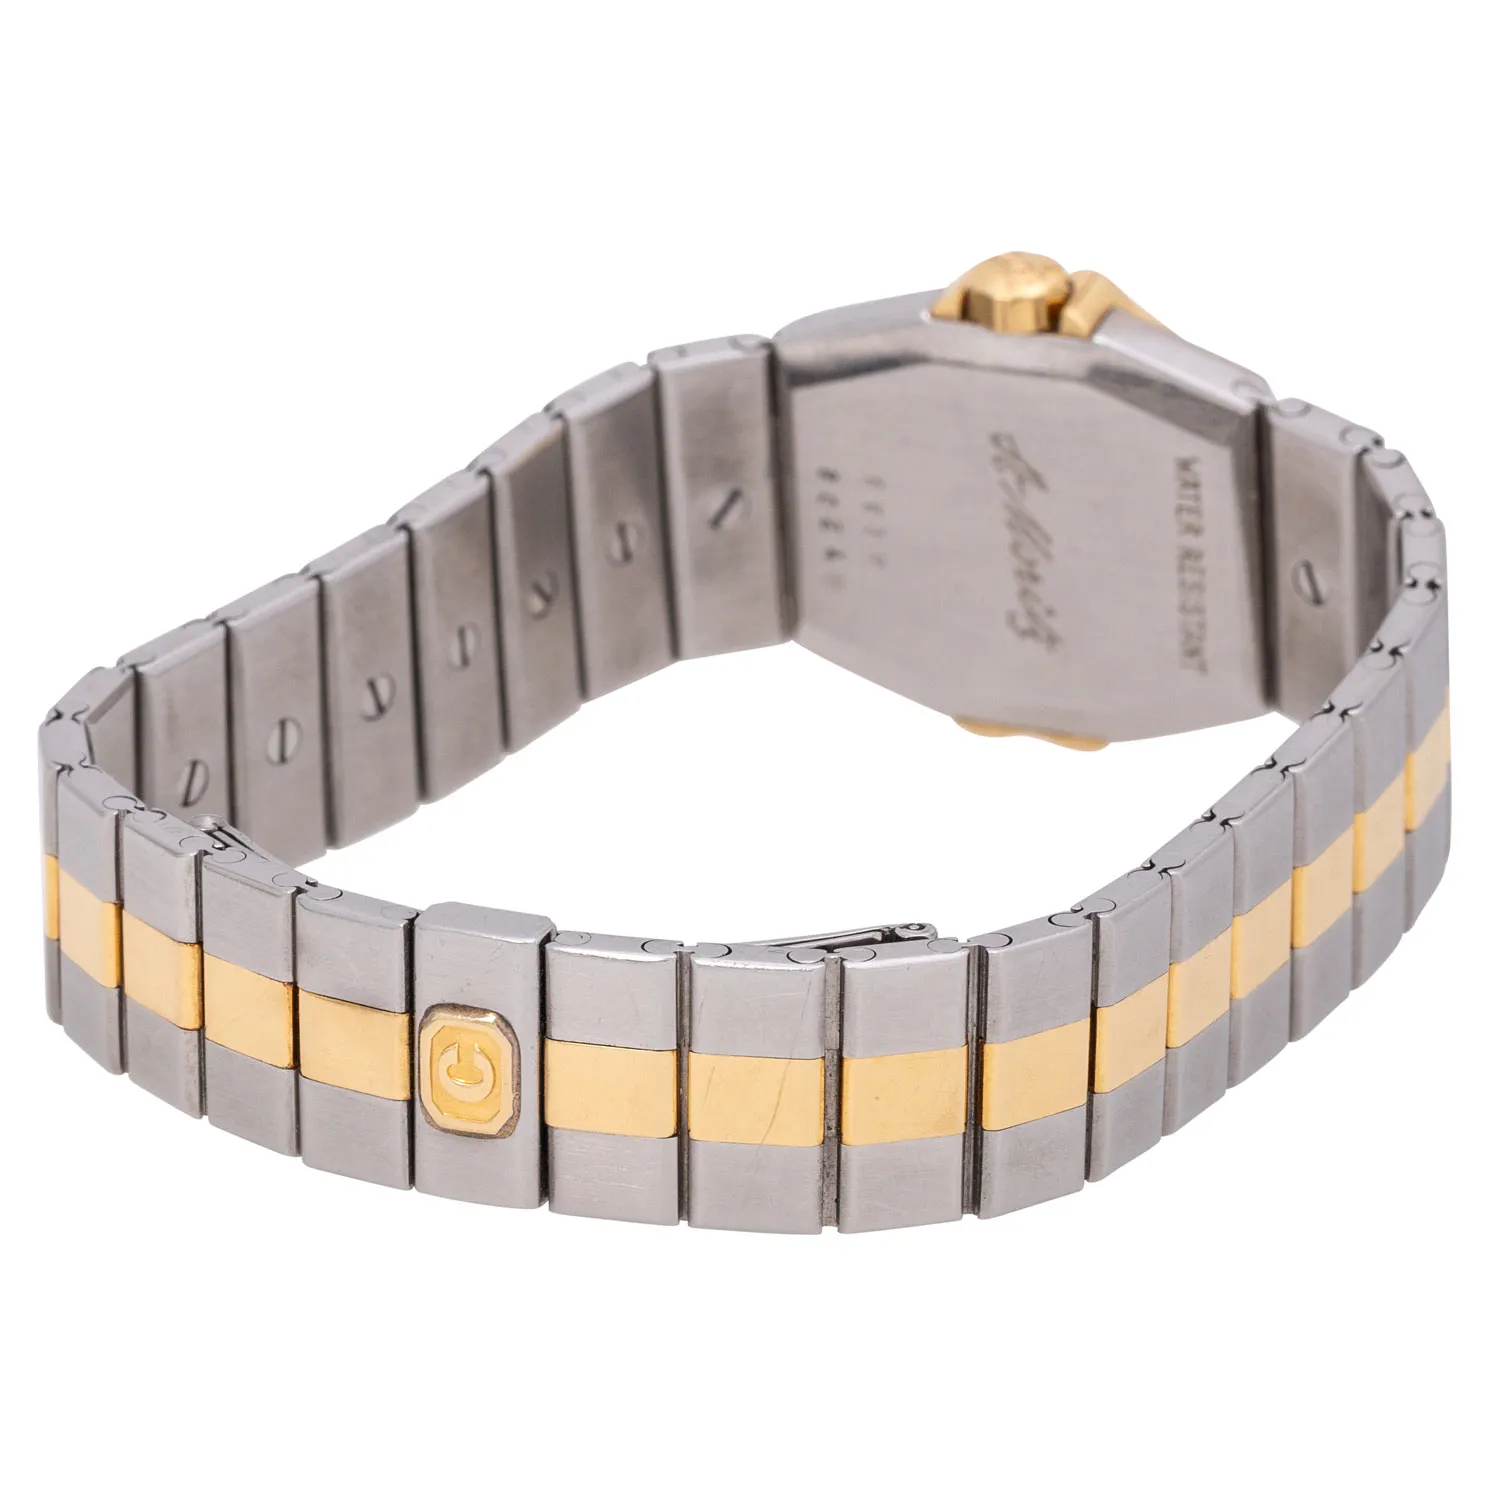 Chopard St. Moritz 8024 24mm Yellow gold, stainless steel and diamond-set 6